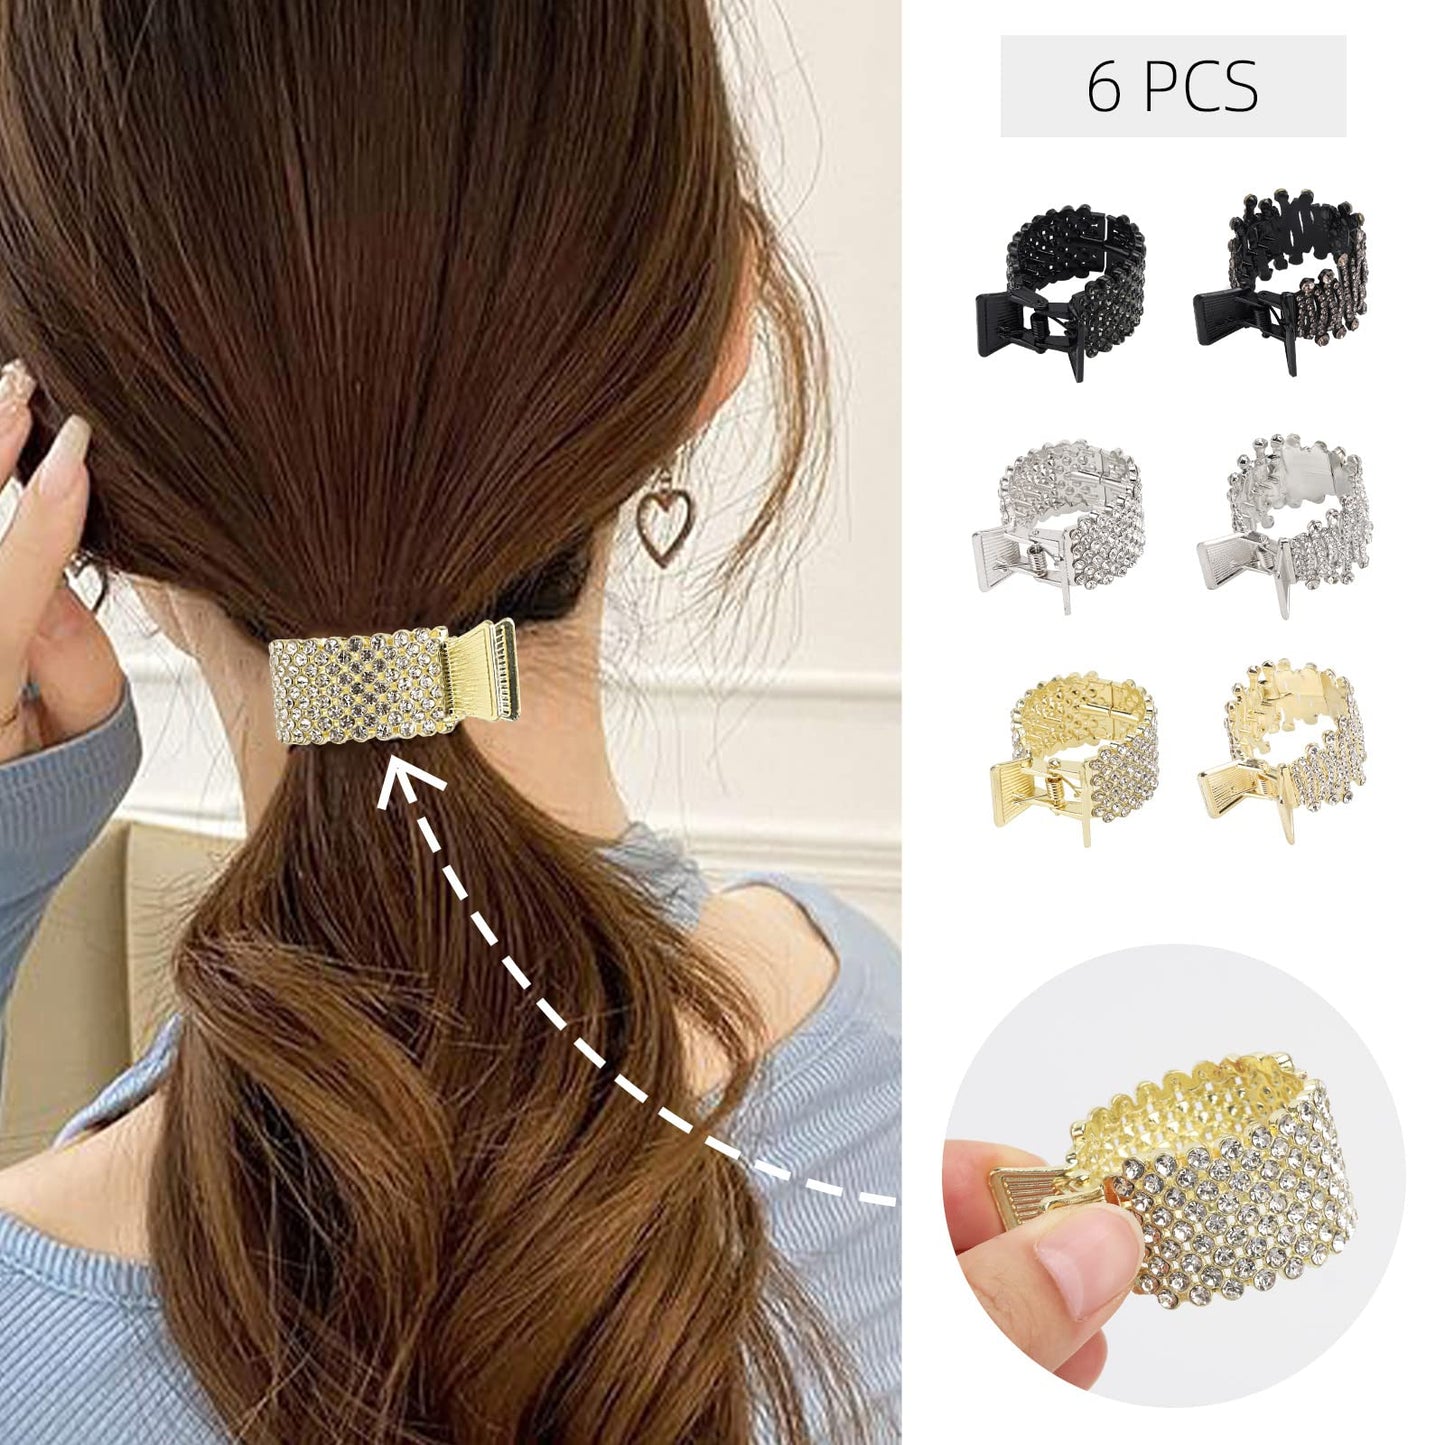 6PCS Small Hair Claw Clips for High Ponytail, Rhinestone Shark Hair Clips for Women Girls Thick Long Hair